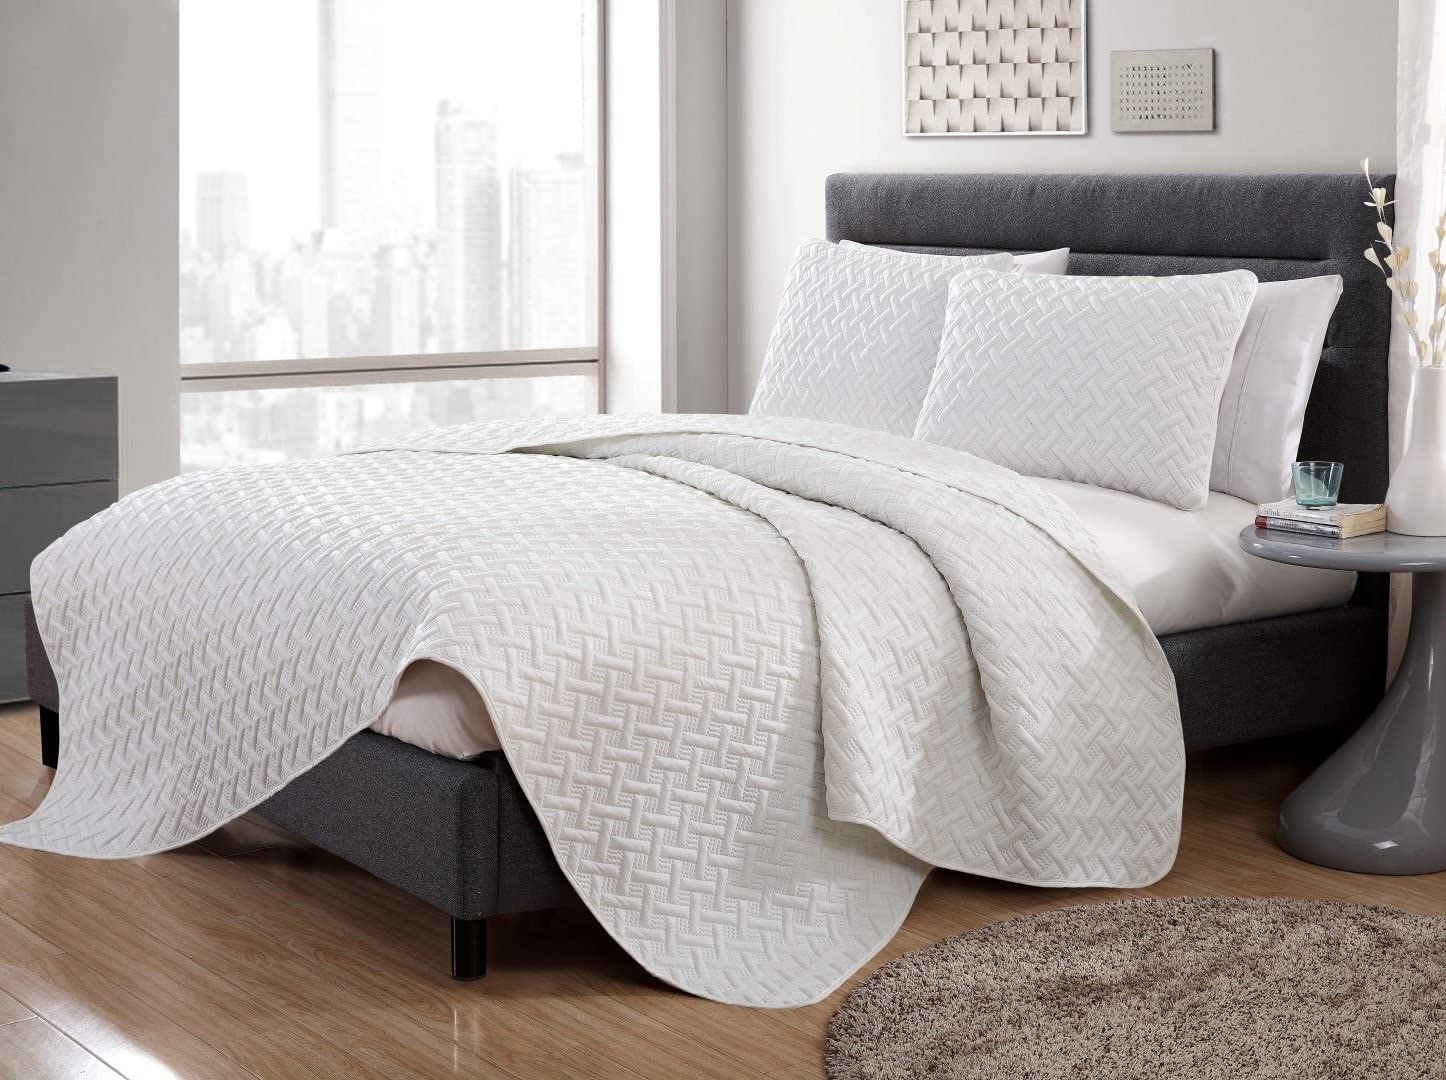 Details about   VCNY Home Nina Bedding Collection Luxury Premium Ultra Soft Quilt Coverlet Comf 